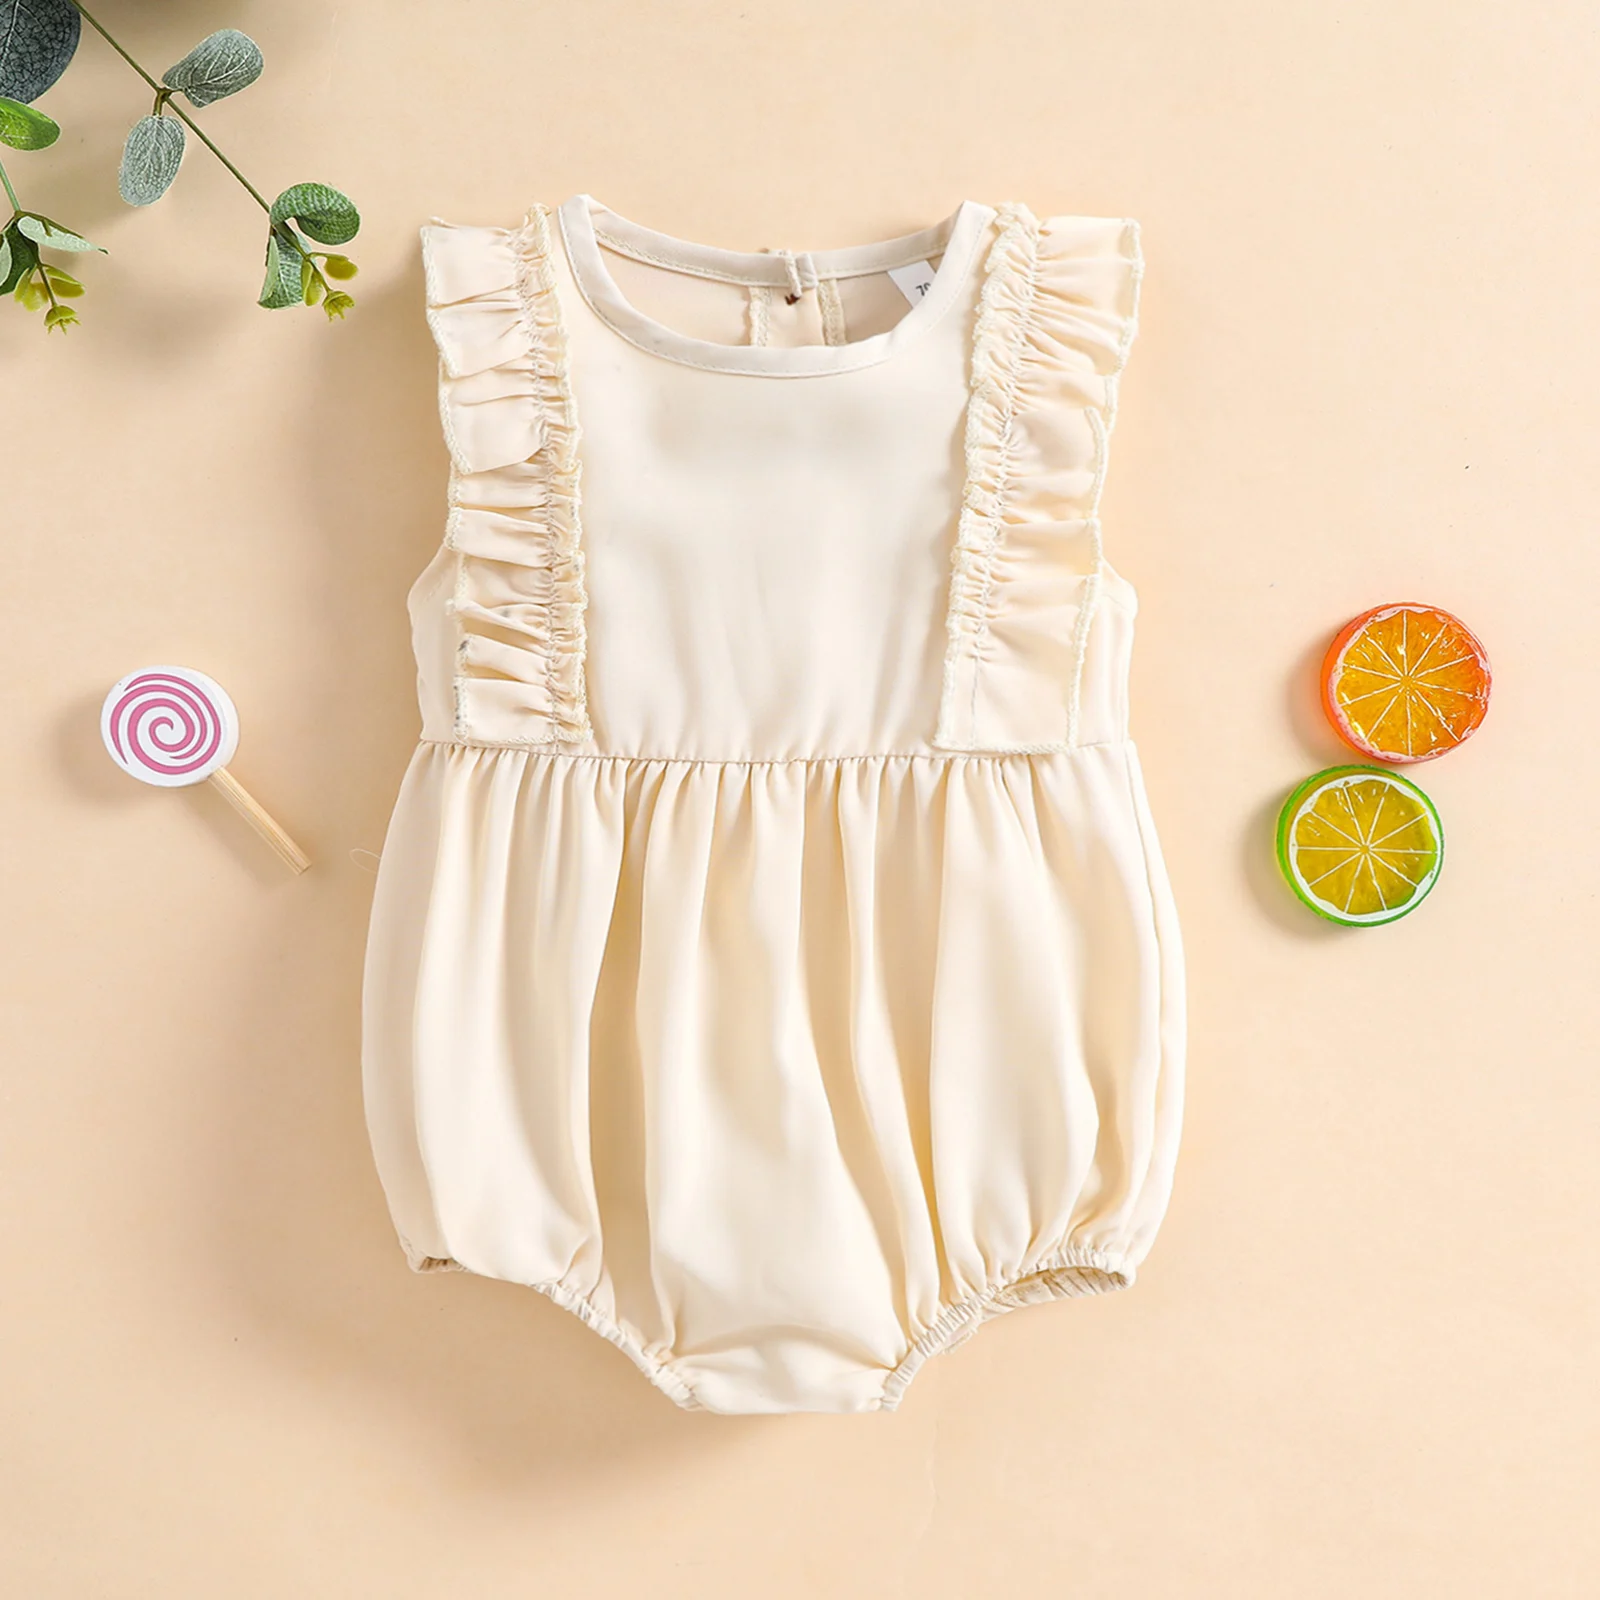 bamboo baby bodysuits	 Ma&Baby 0-24M Newborn Infant Baby Girls Romper Ruffle Button Jumpsuit Playsuit Summer Girl Clothing Costumes D01 bright baby bodysuits	